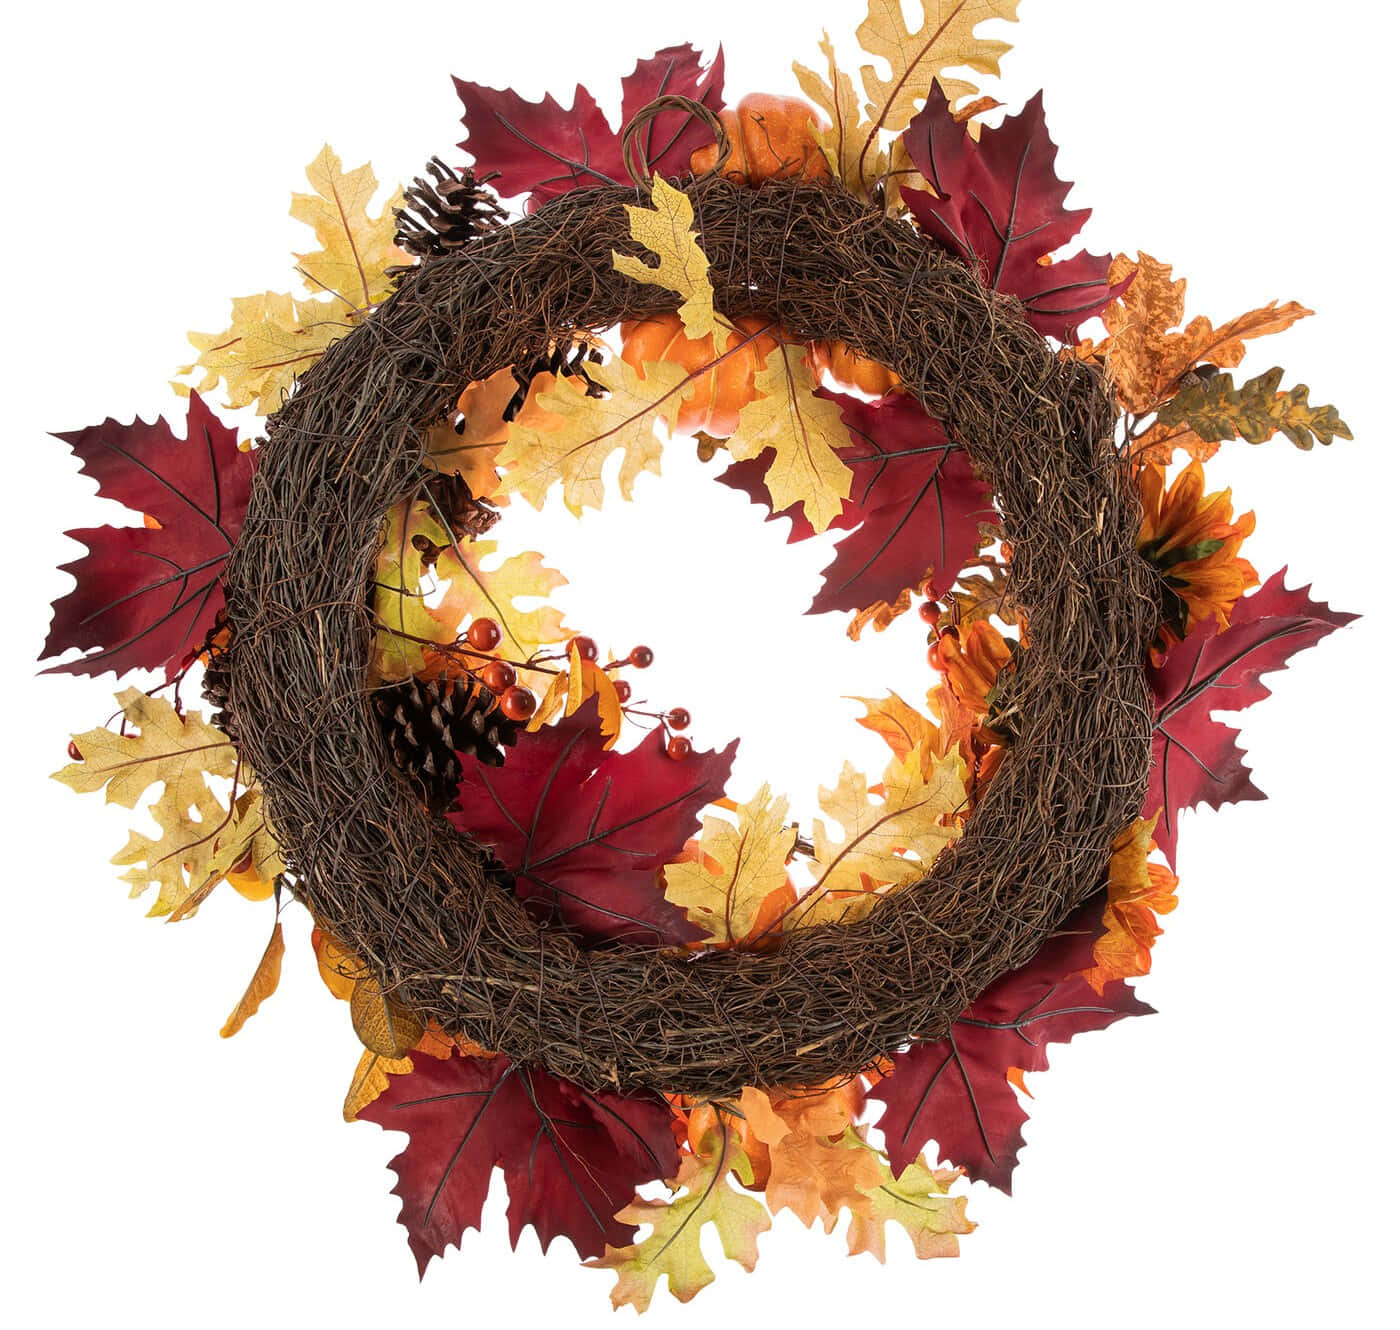 Beautiful Fall Wreath with Vibrant Autumn Colors Wallpaper